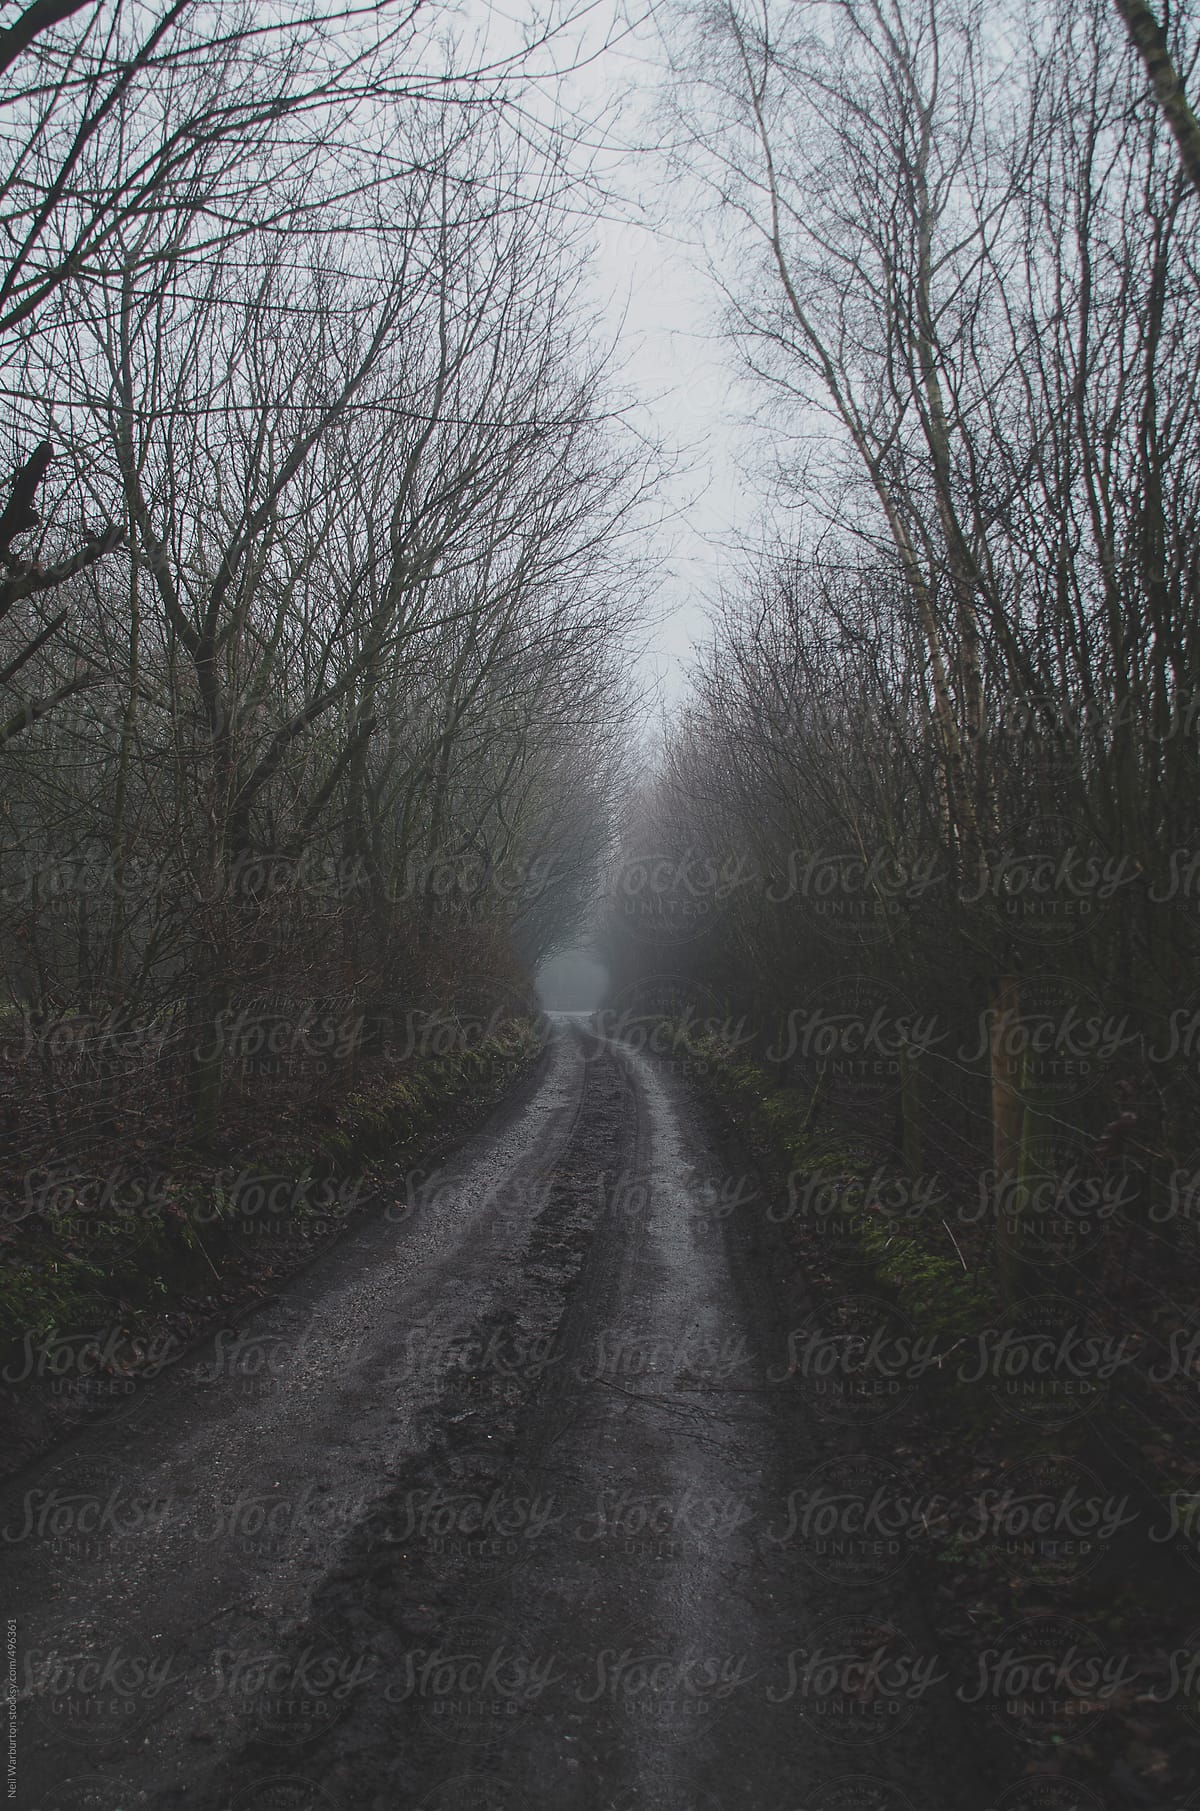 Misty country lane